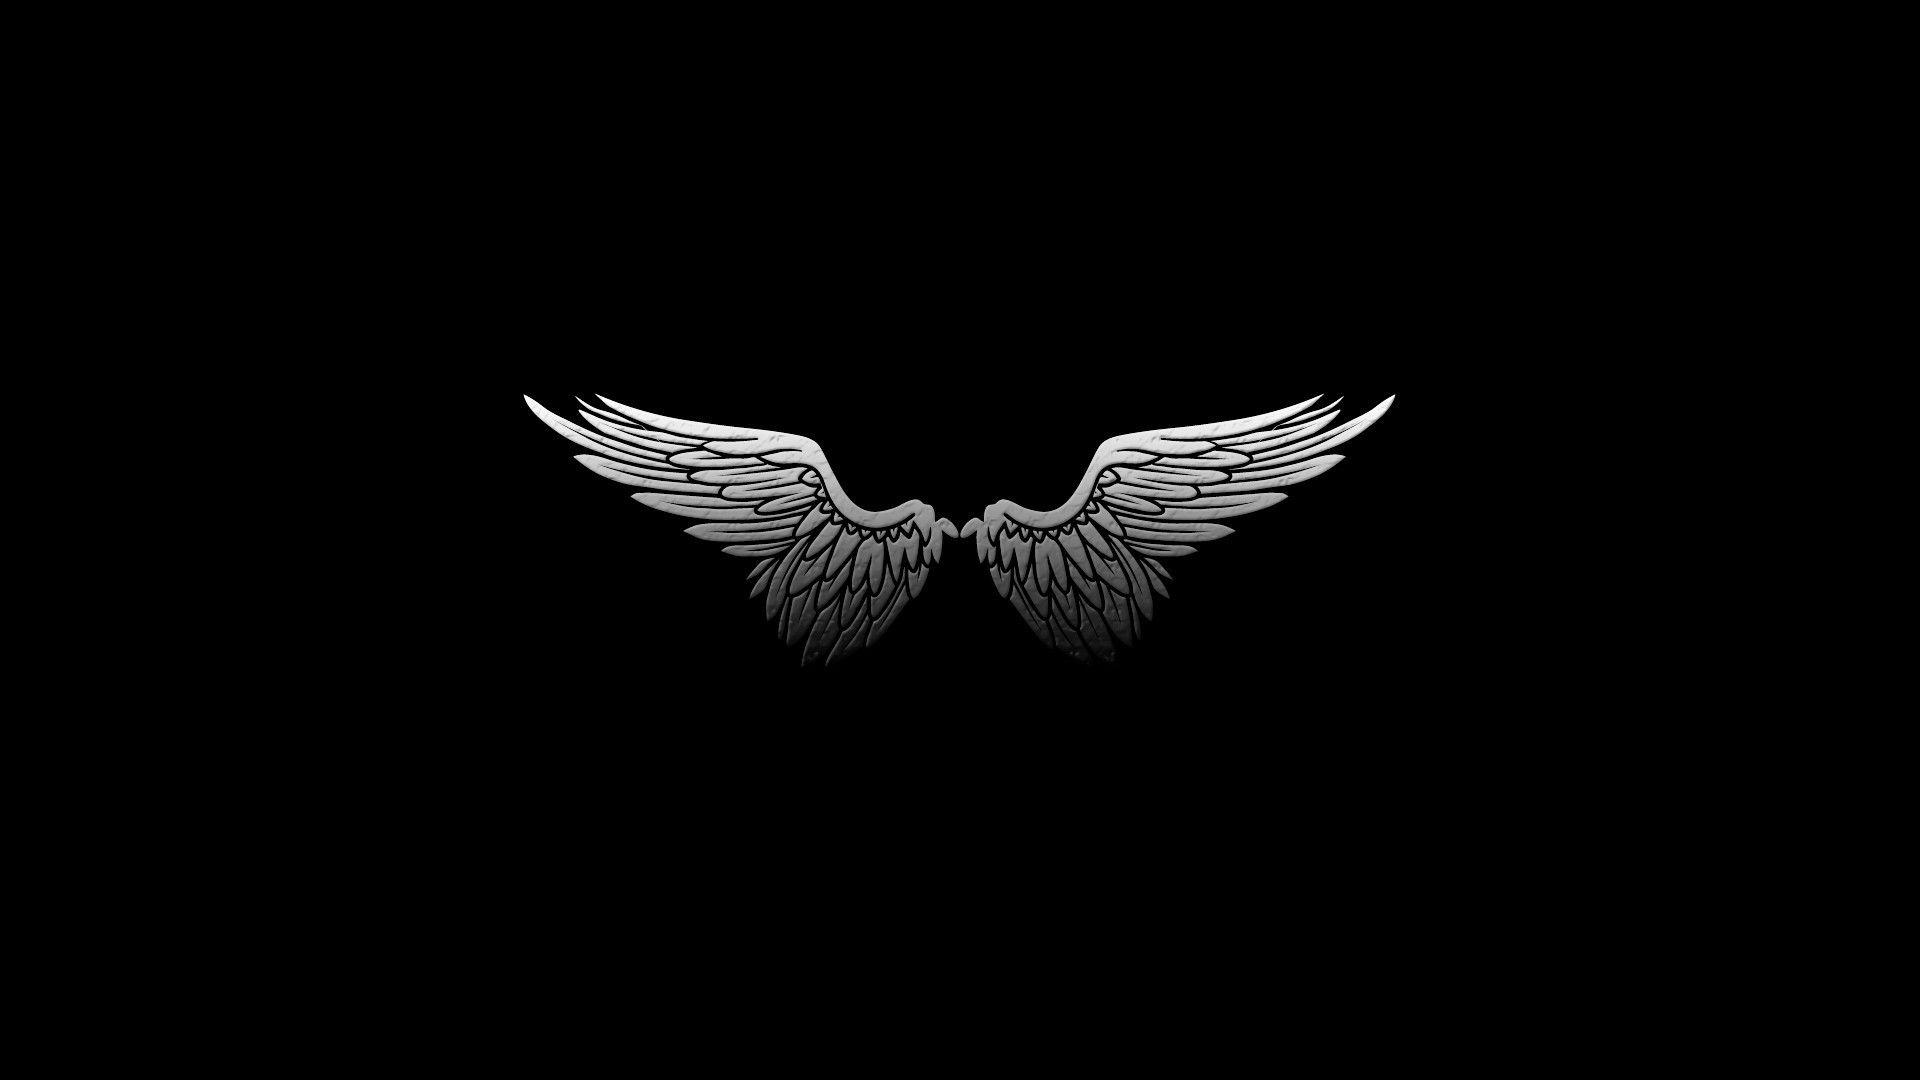 Black wallpaper with wings wallpaper and image